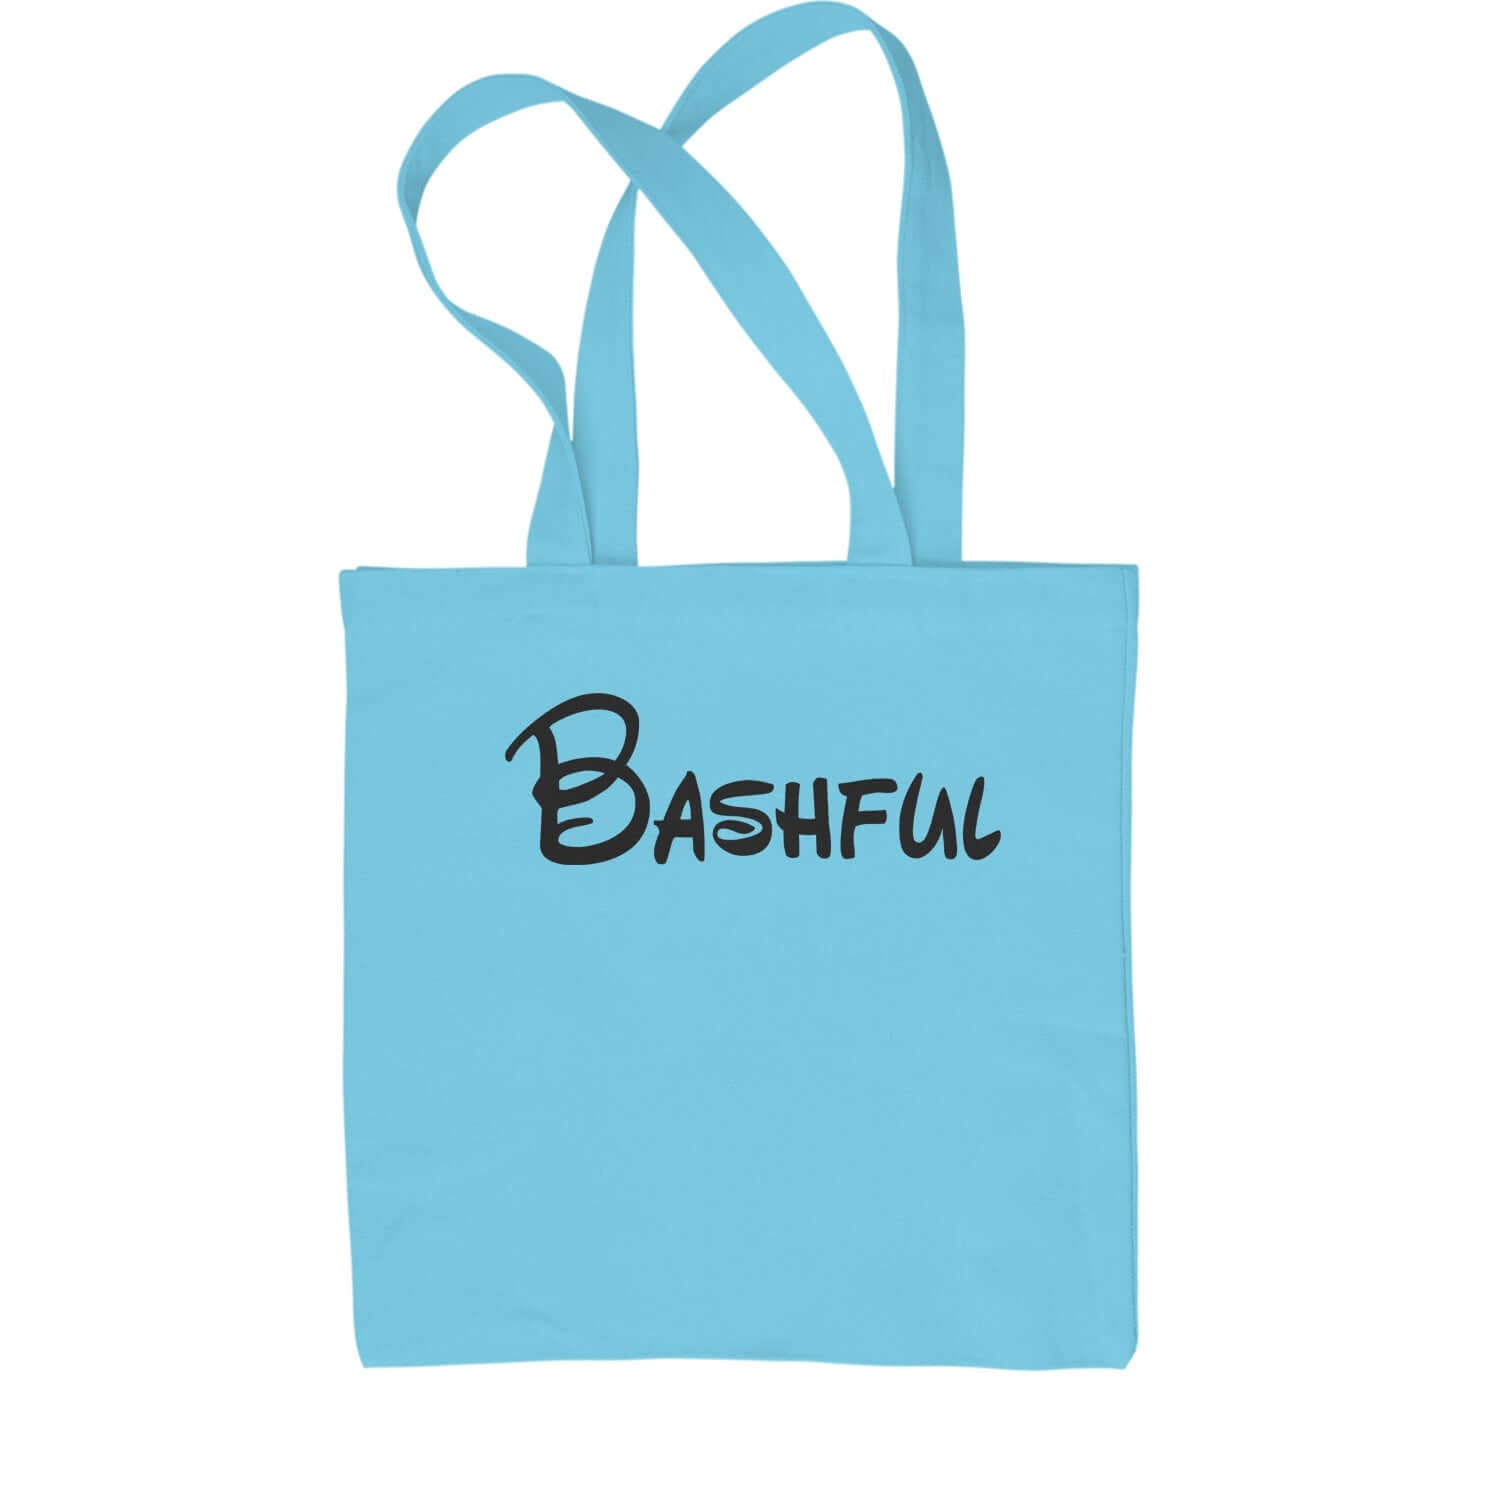 Bashful - 7 Dwarfs Costume Shopping Tote Bag and, costume, dwarfs, group, halloween, matching, seven, snow, the, white by Expression Tees